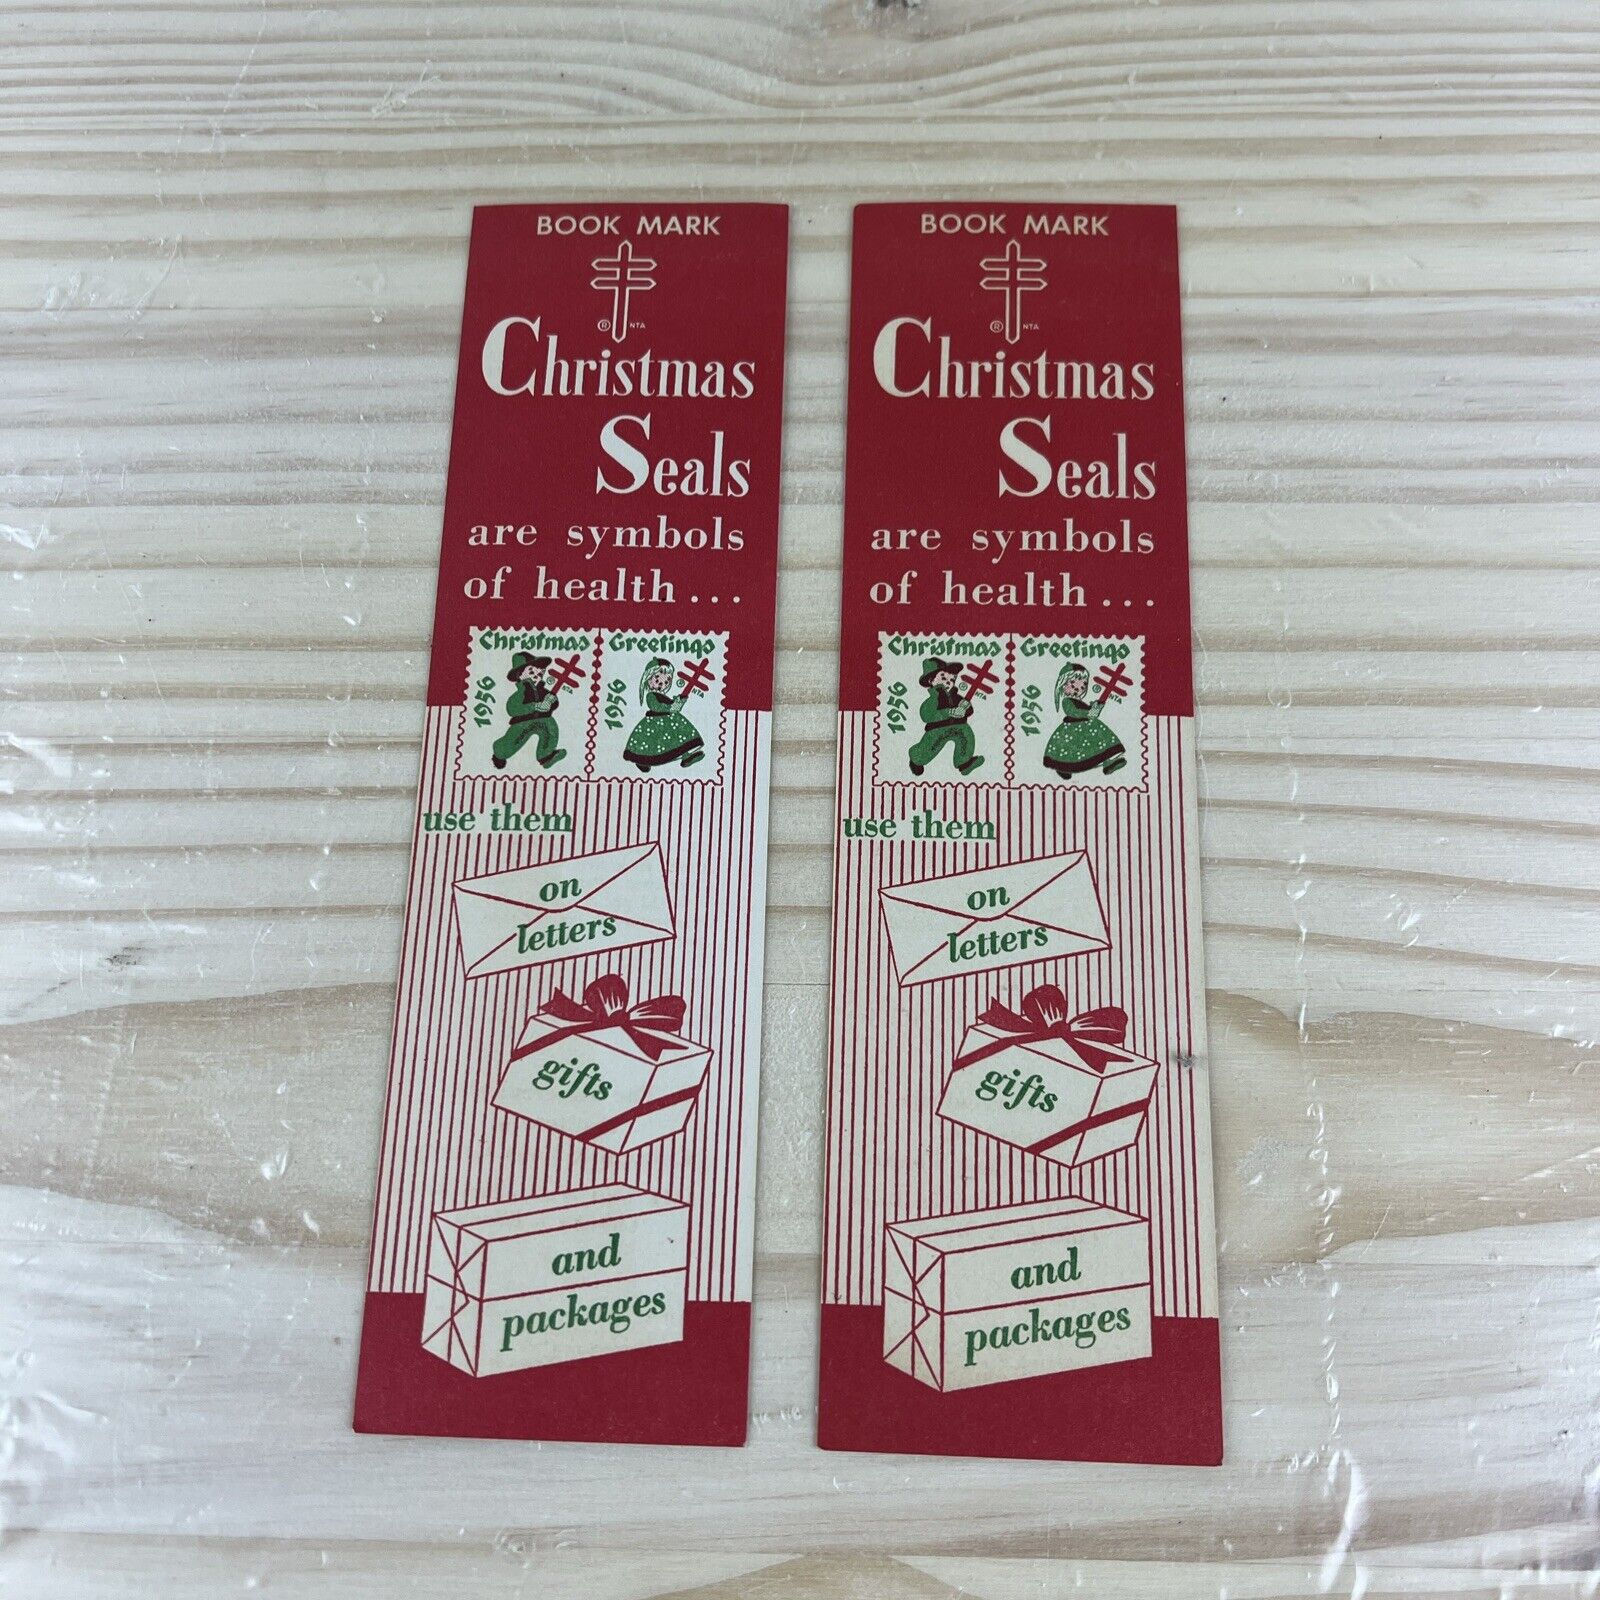 1956 Lot of 2 Bookmark Christmas Seals are Symbols of Health Fight TB